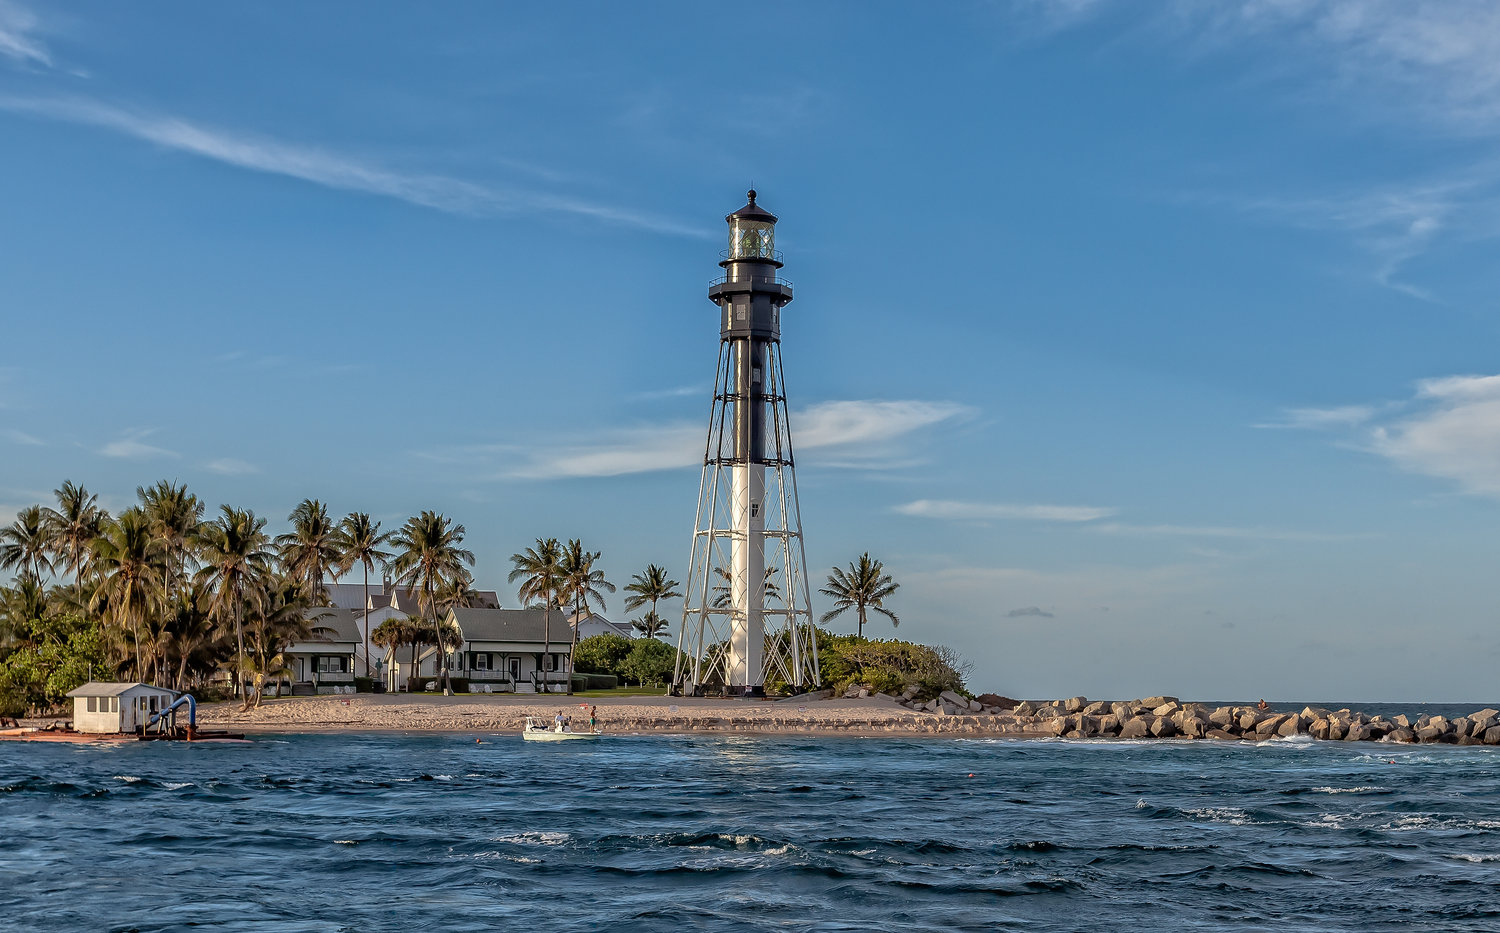 Lighthouse Point was named after the Hillsboro Inlet's Lighthouse in Pompano Beach